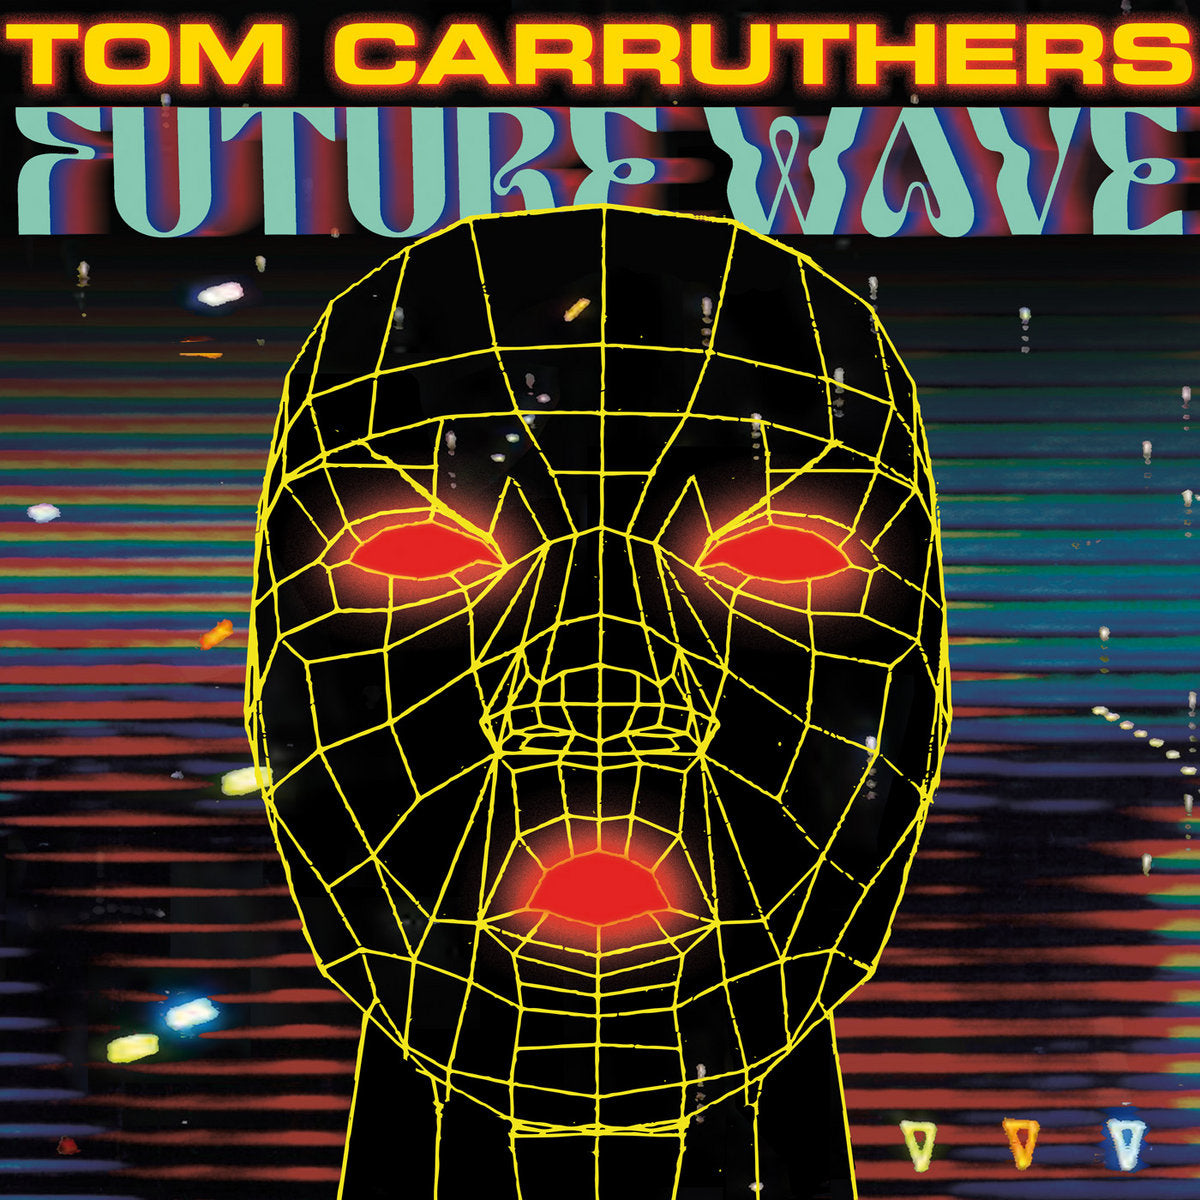 TOM CARRUTHERS 'FUTURE WAVE'